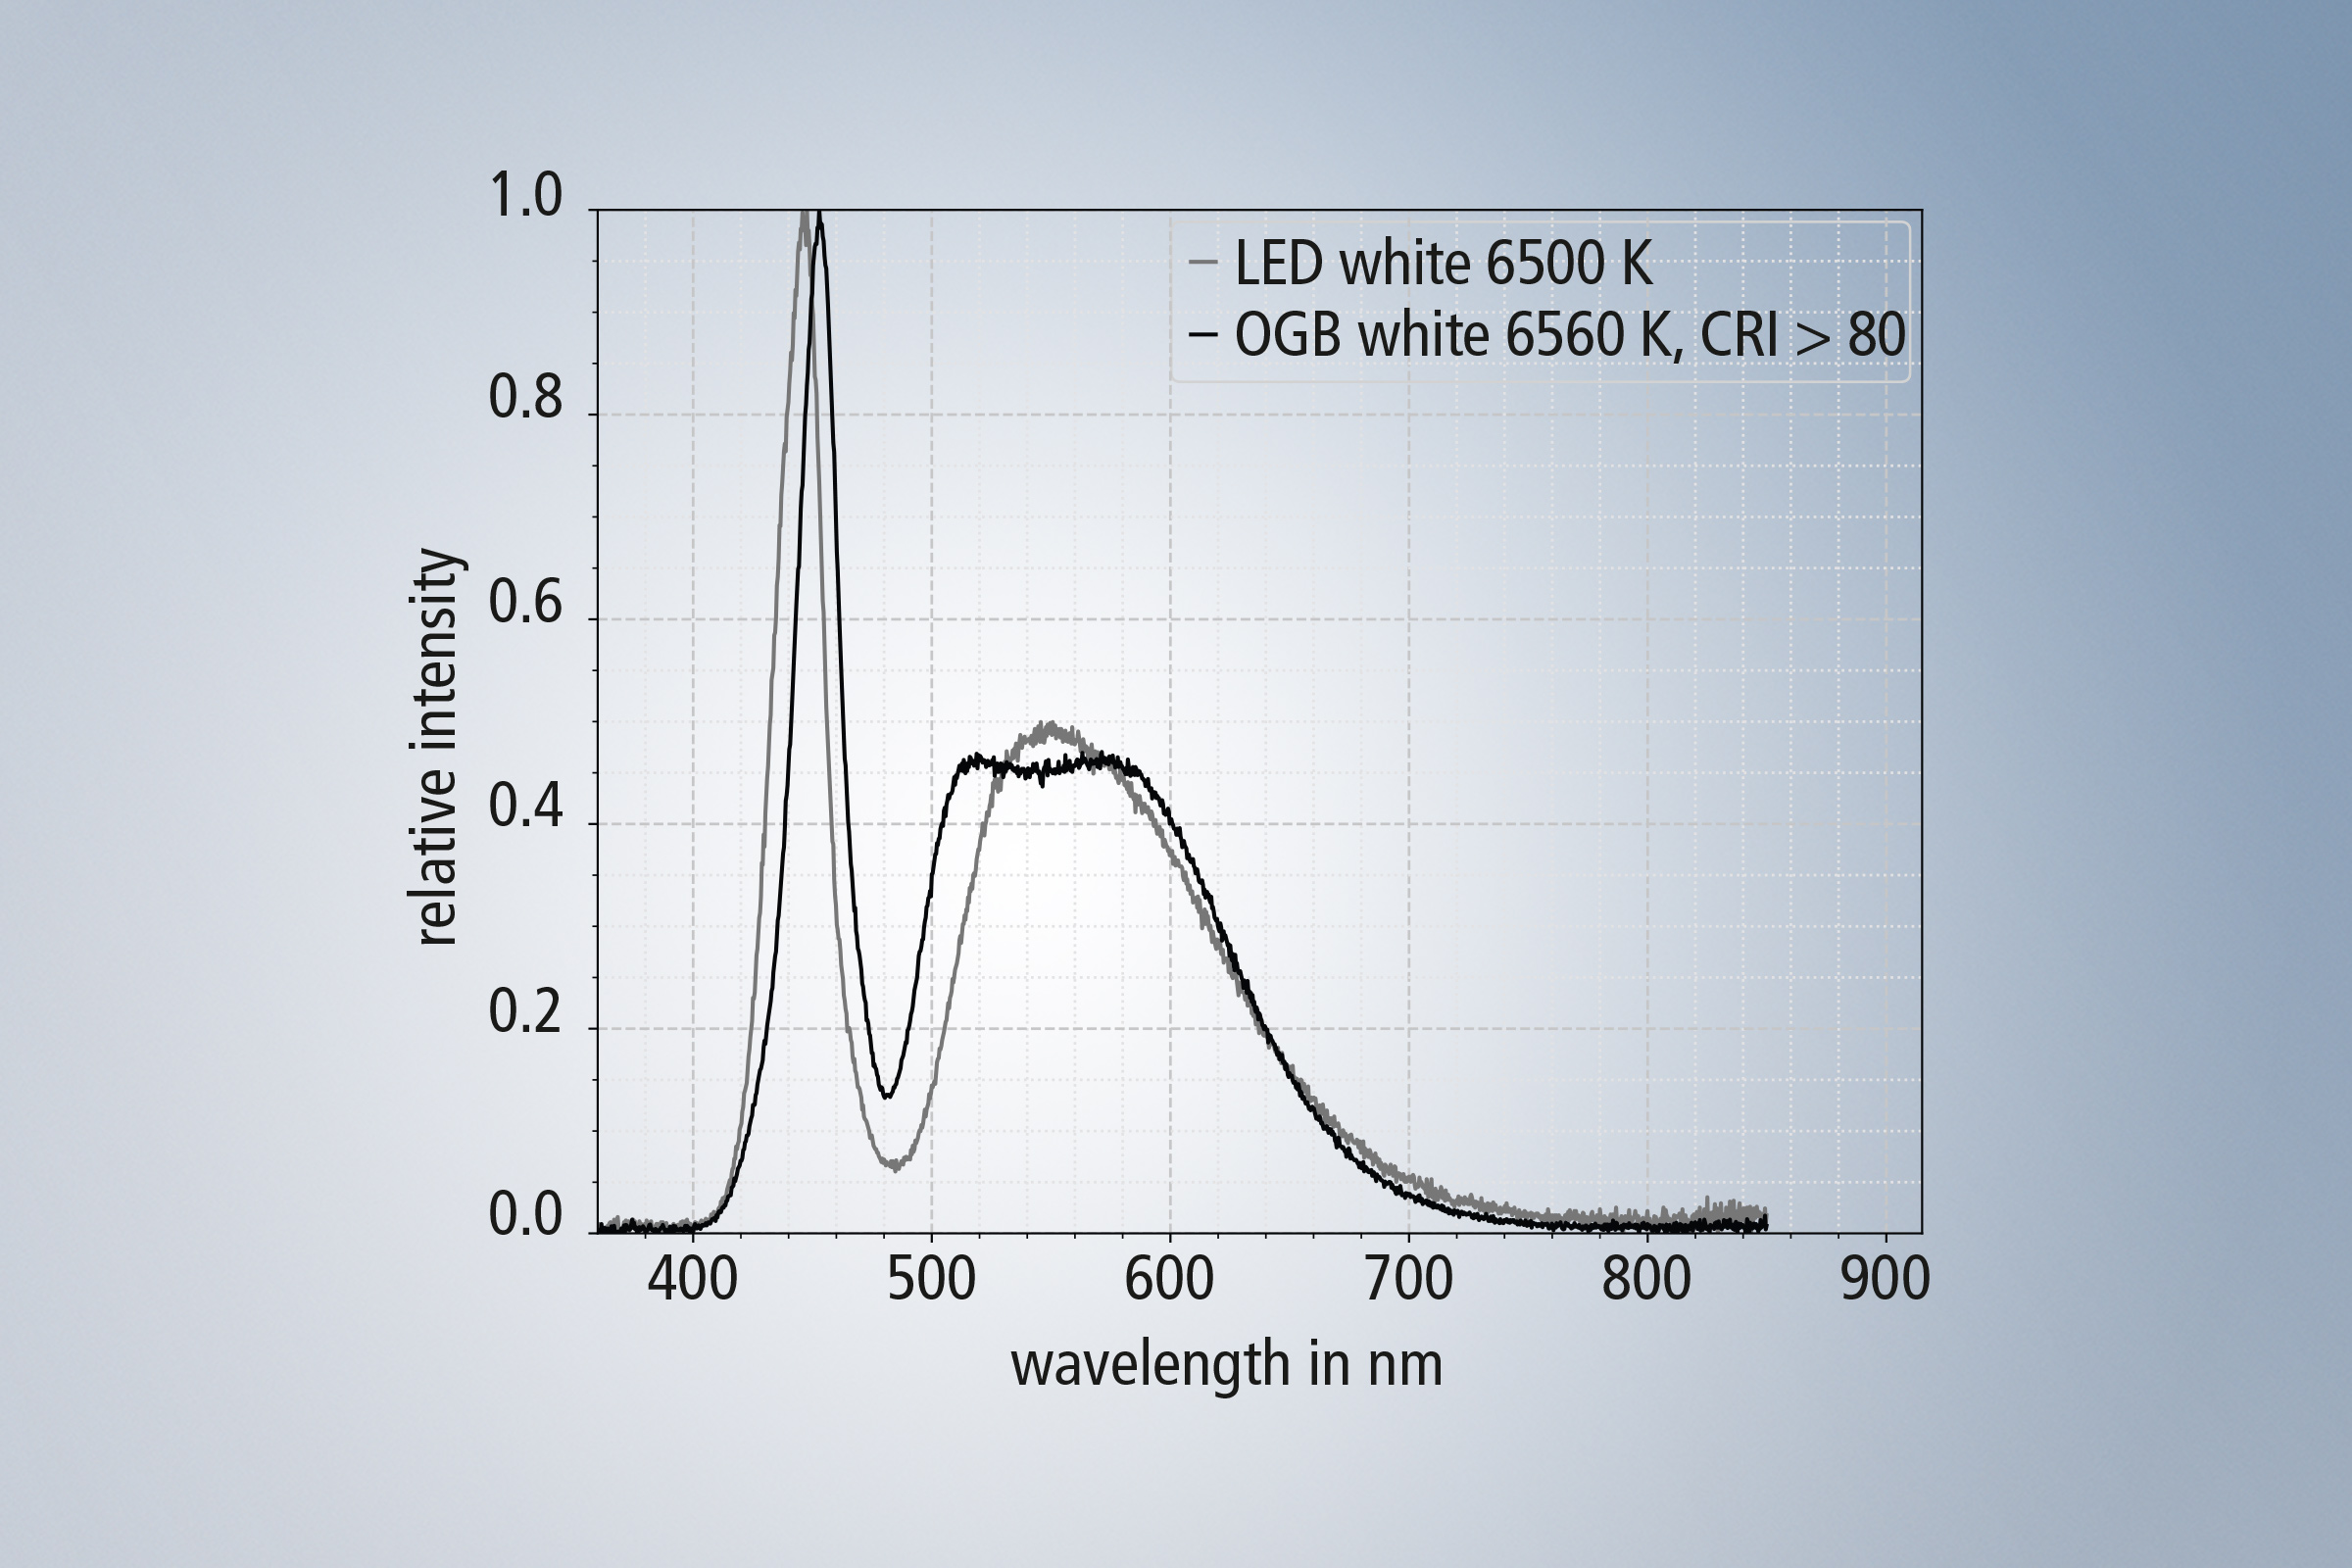 Spectrally complete white light (CRI >80) can be produced by mixing the individual color channels. 